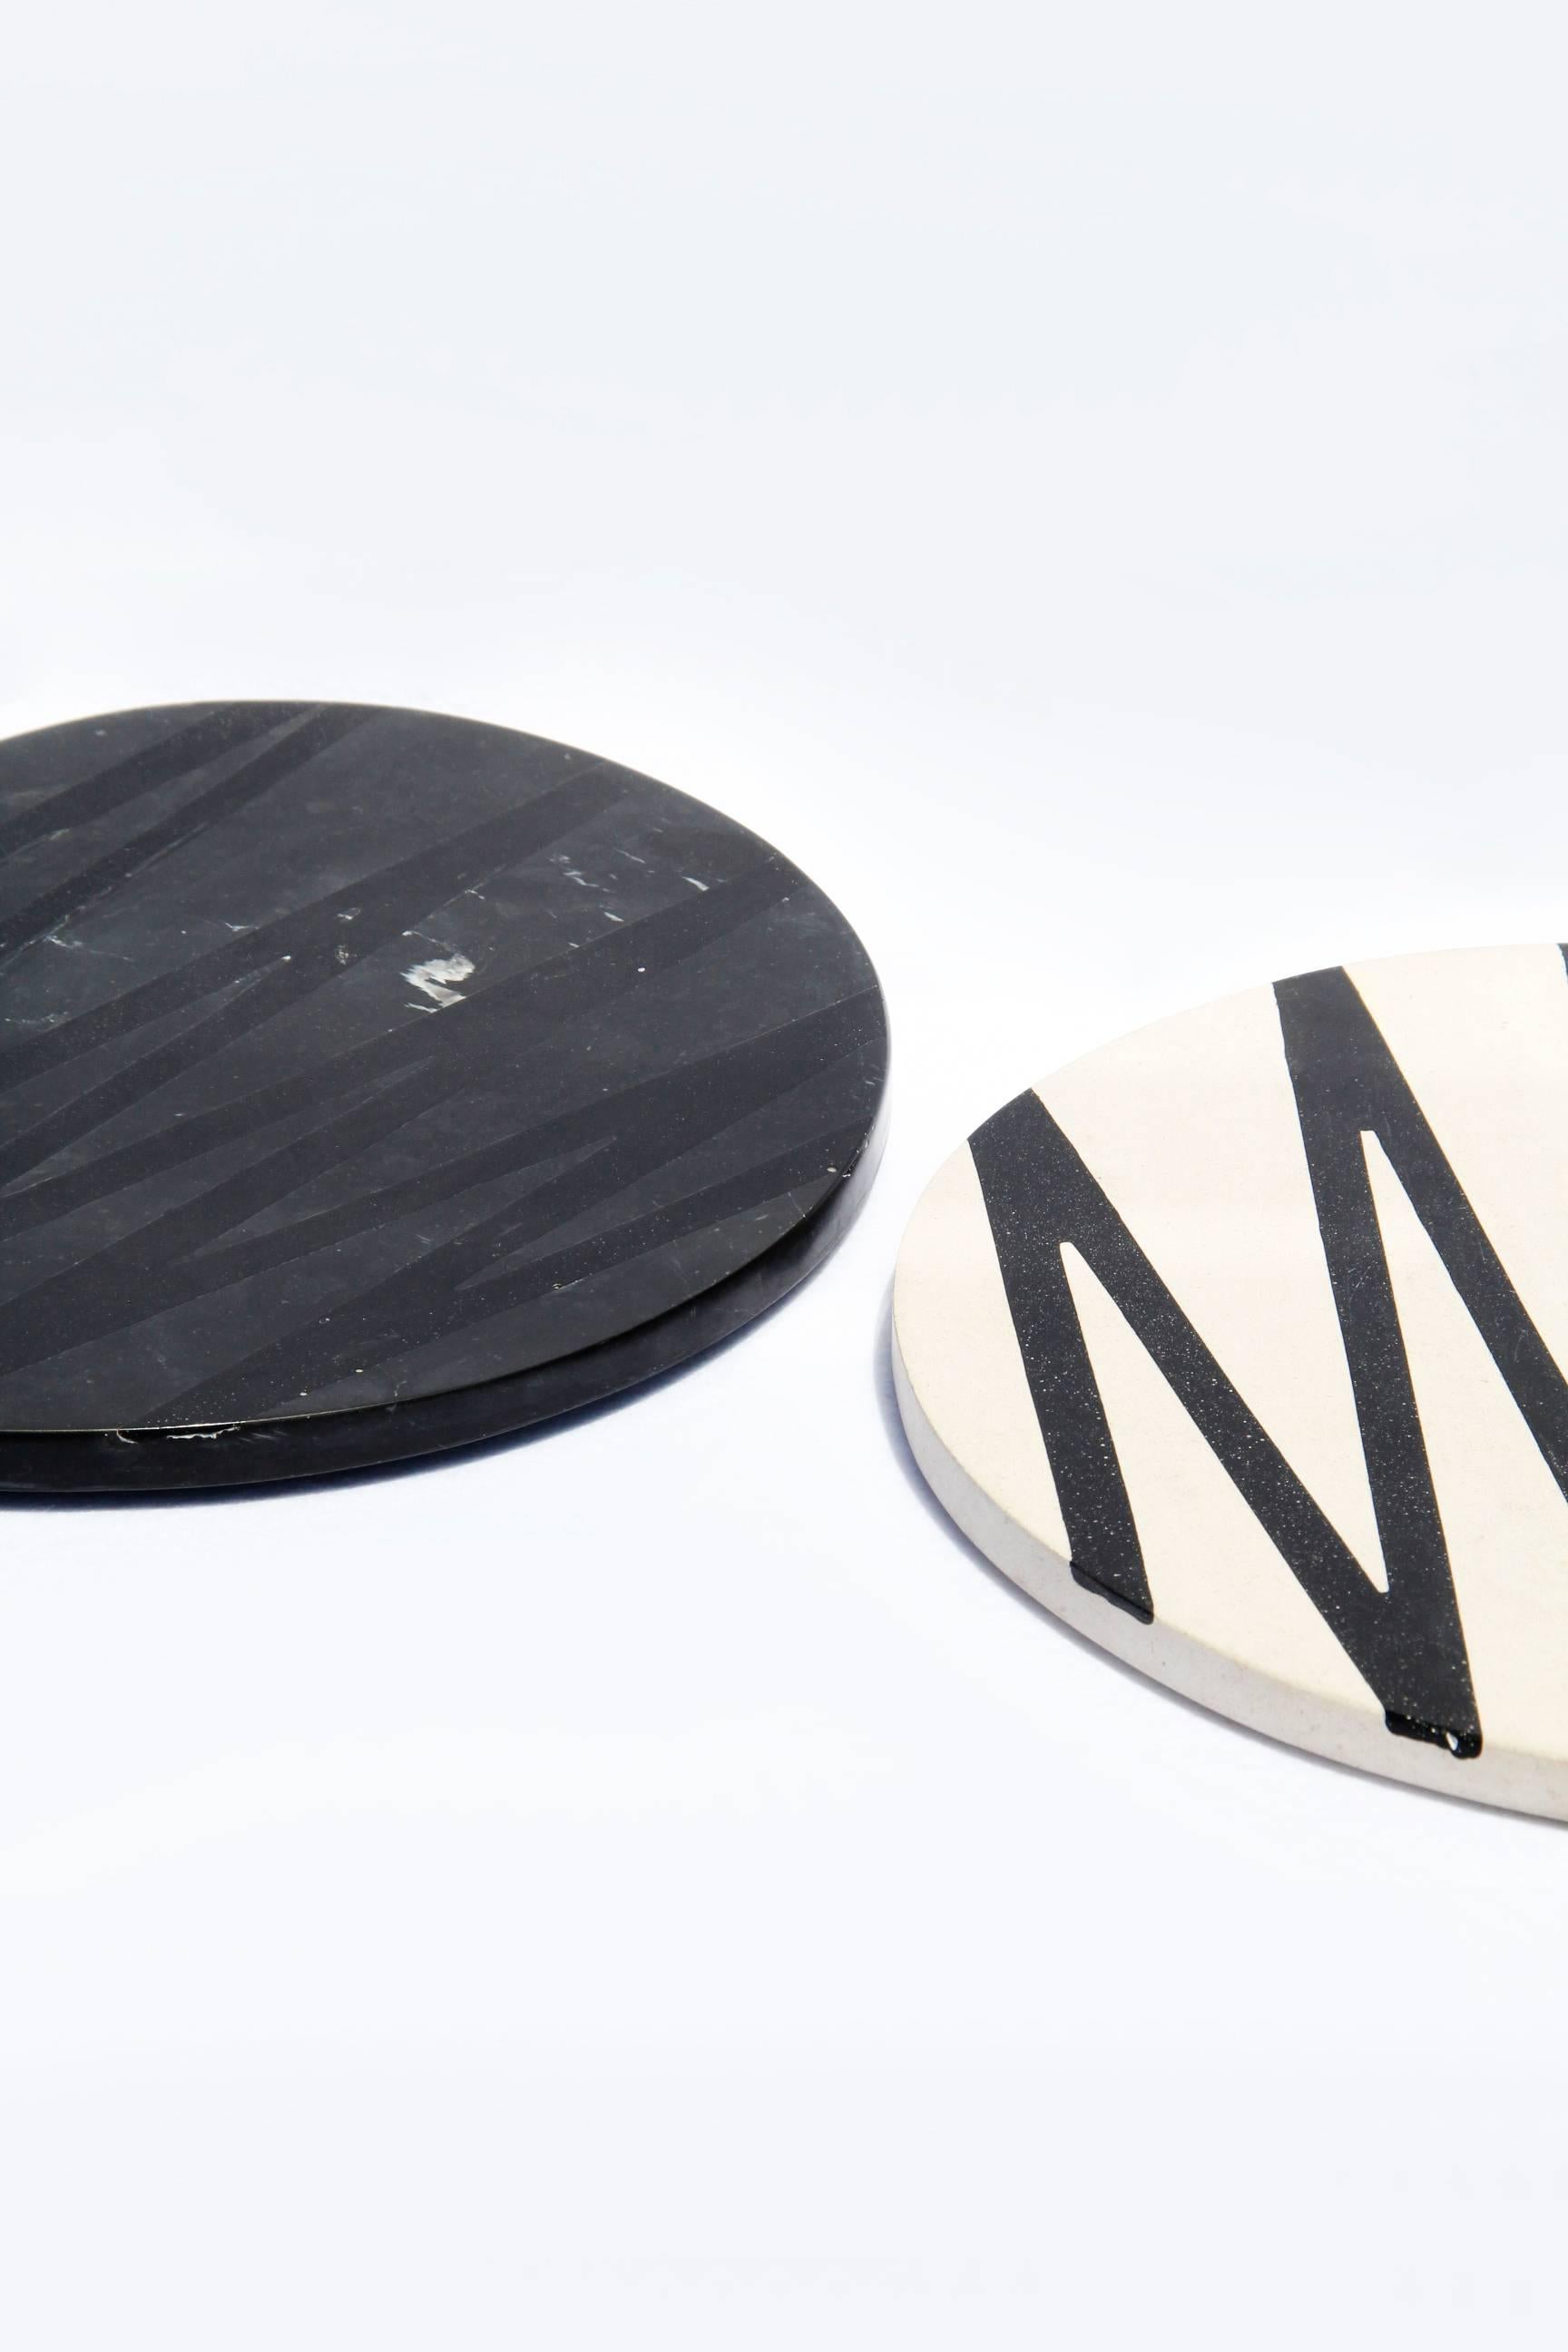 Mexican Duo Cutting Boards and Serving Plates Stone Resin Contemporary Style For Sale